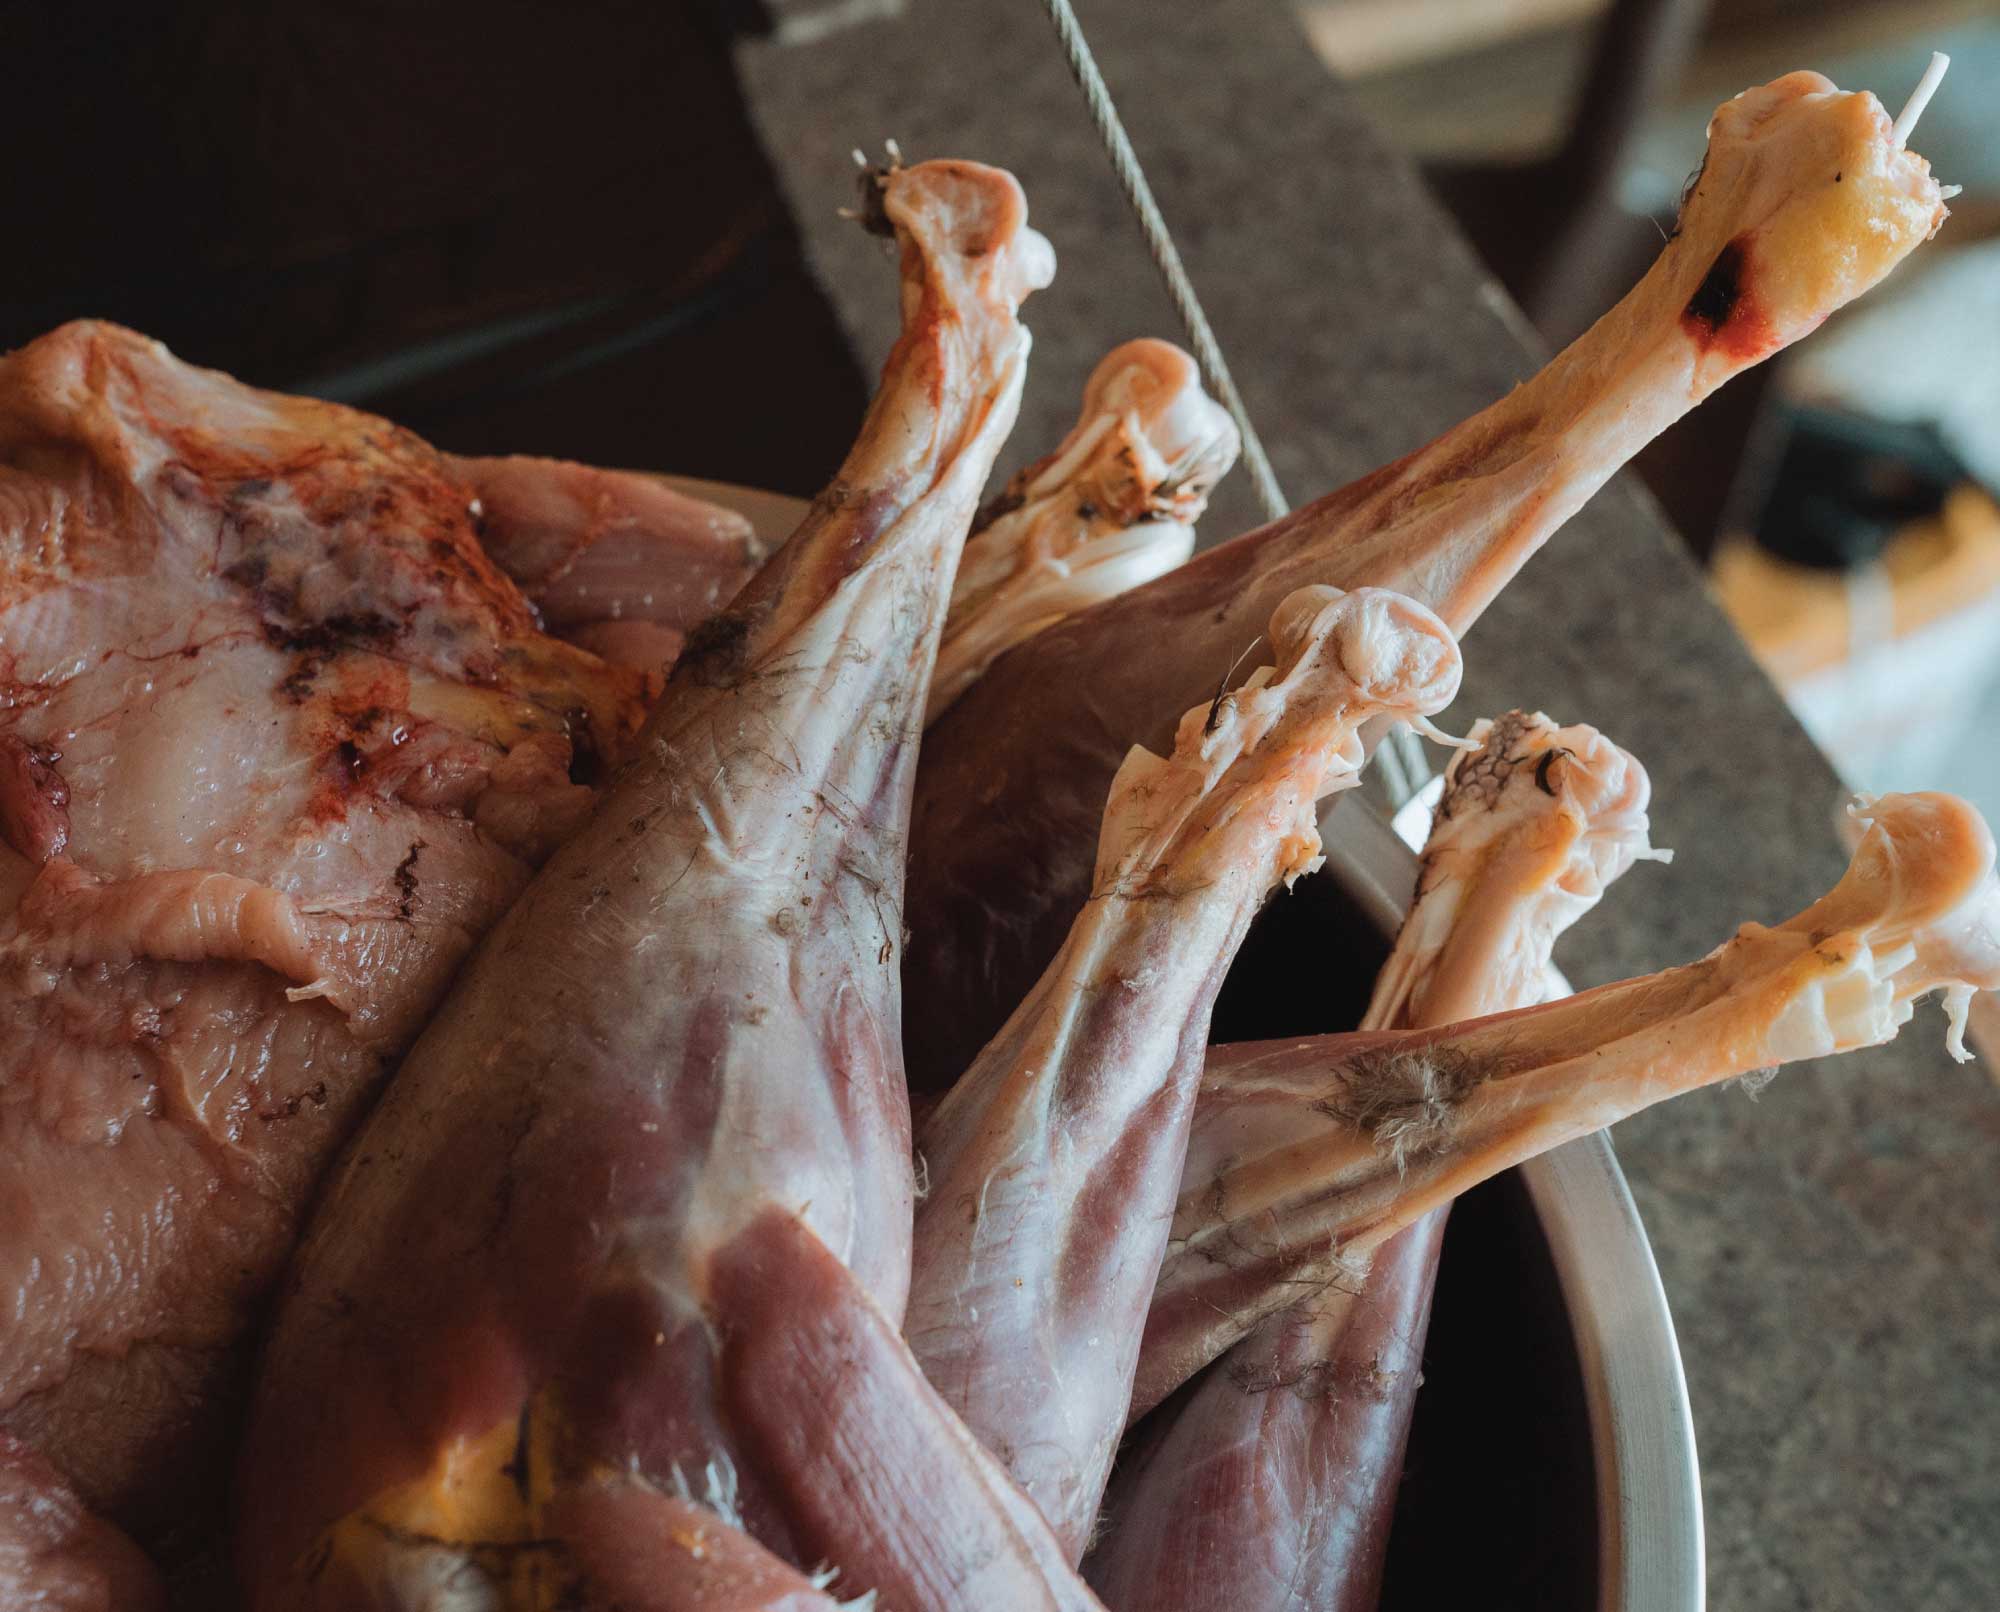 Turkey FUNdamentals: Top Questions for Cooking a Turkey